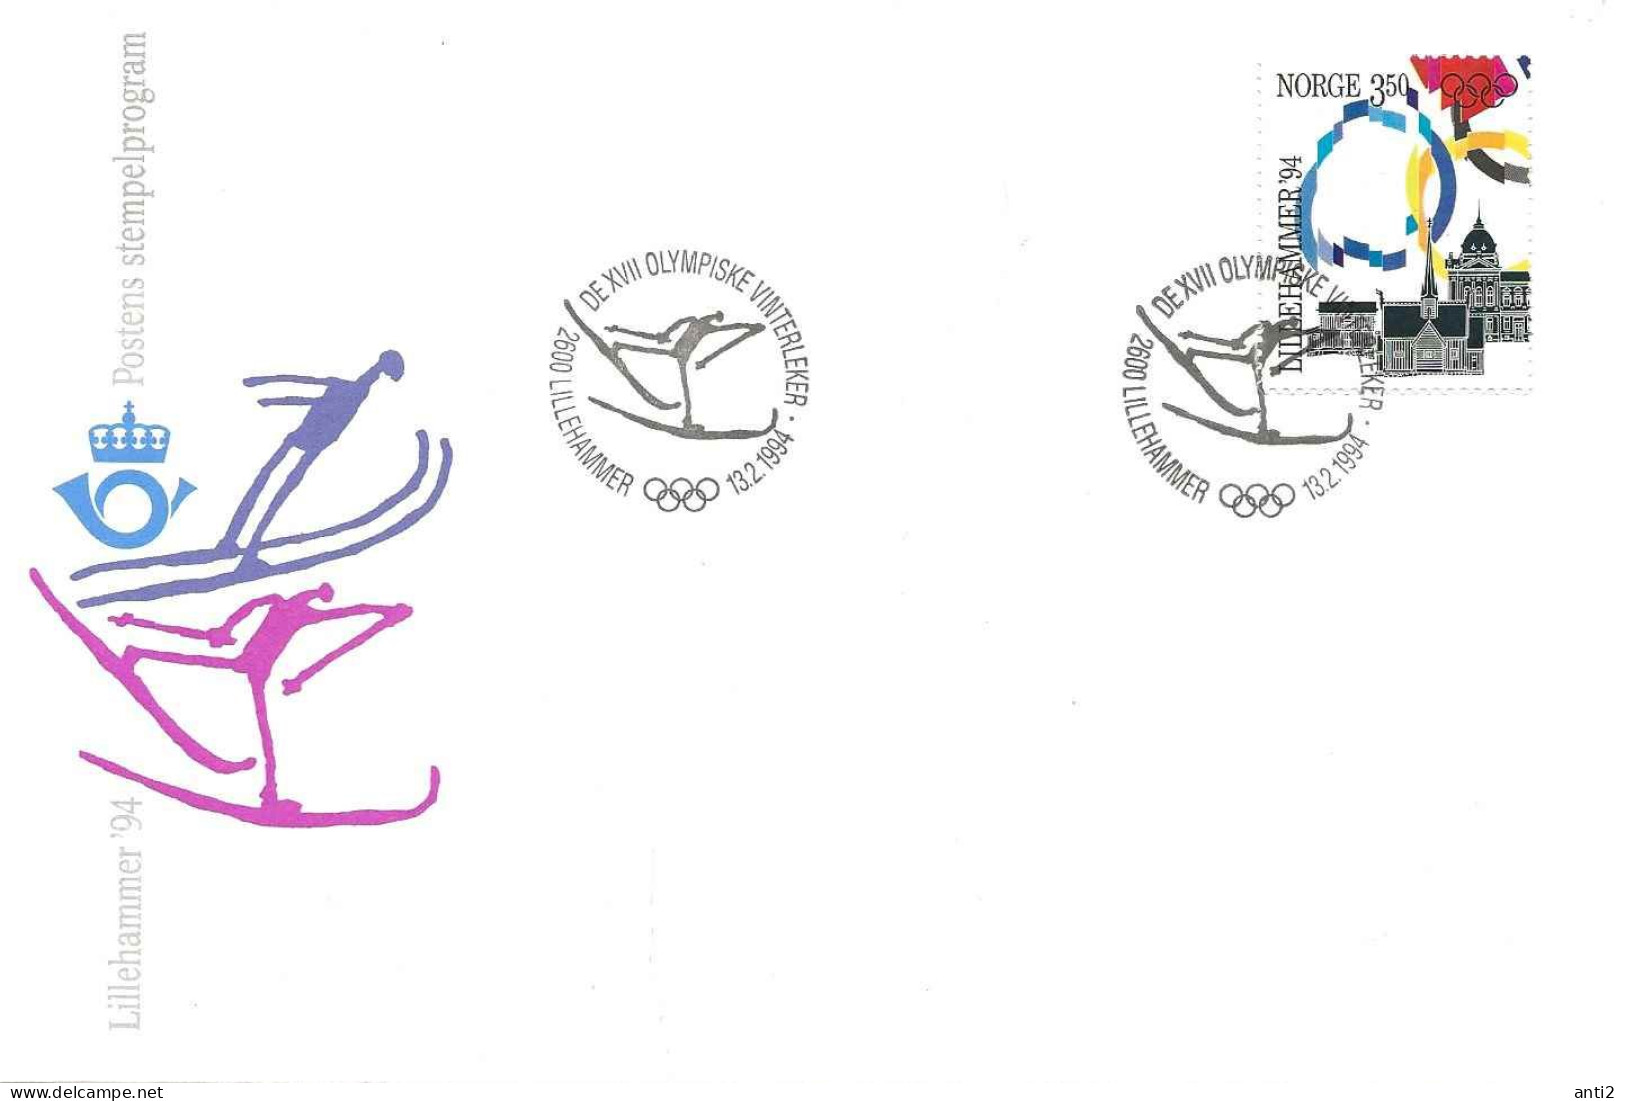 Norway Norge 1994 Winter Olympics, Lillehammer - Flags Mi 1148  Skiing Cross Country Cancelled Lillehammer 13.2.94 - Lettres & Documents